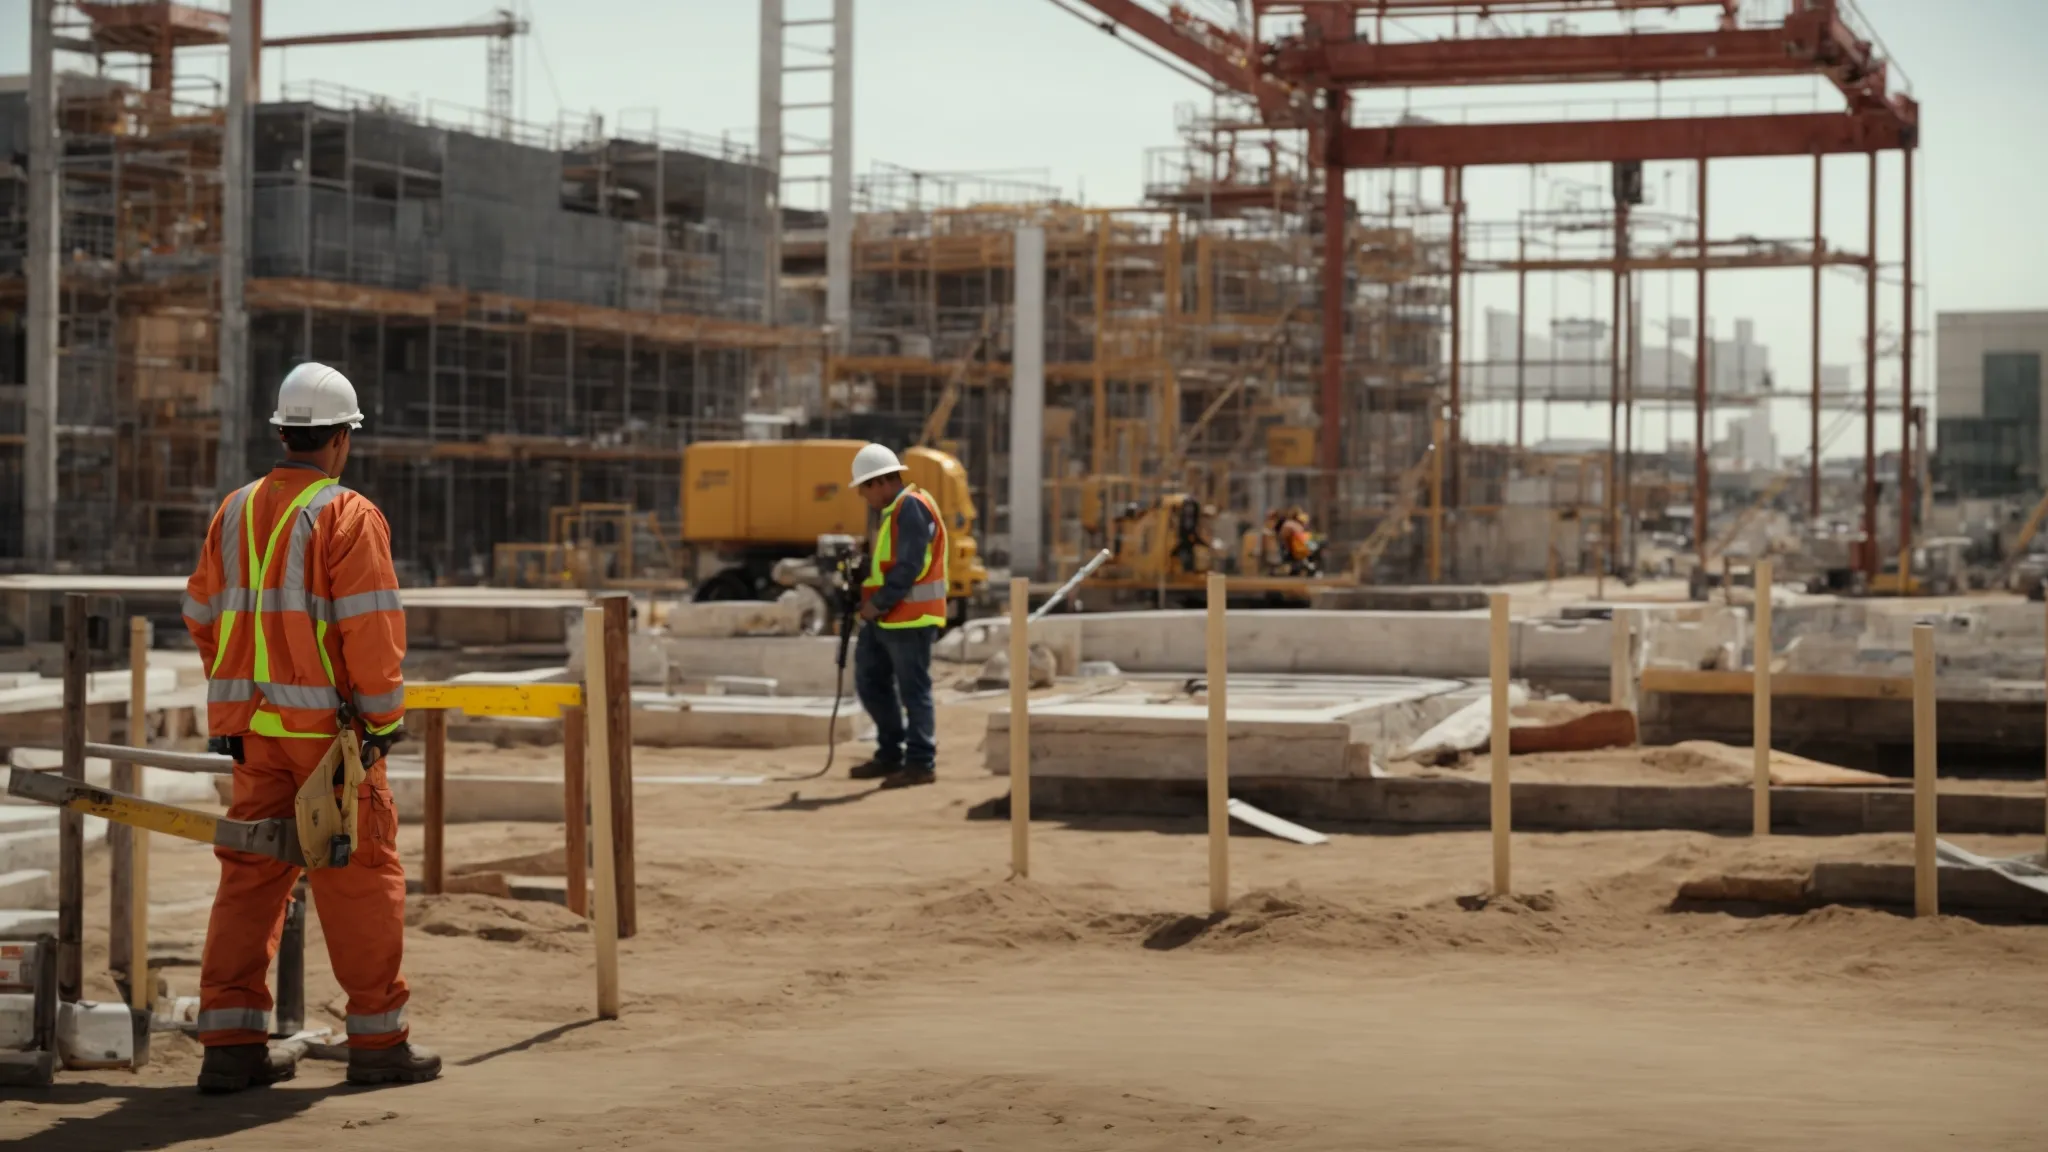 Create an image of a construction site in San Diego, with workers wearing various safety gear and signage displaying complex safety regulations. Show a worker facing compliance challenges.